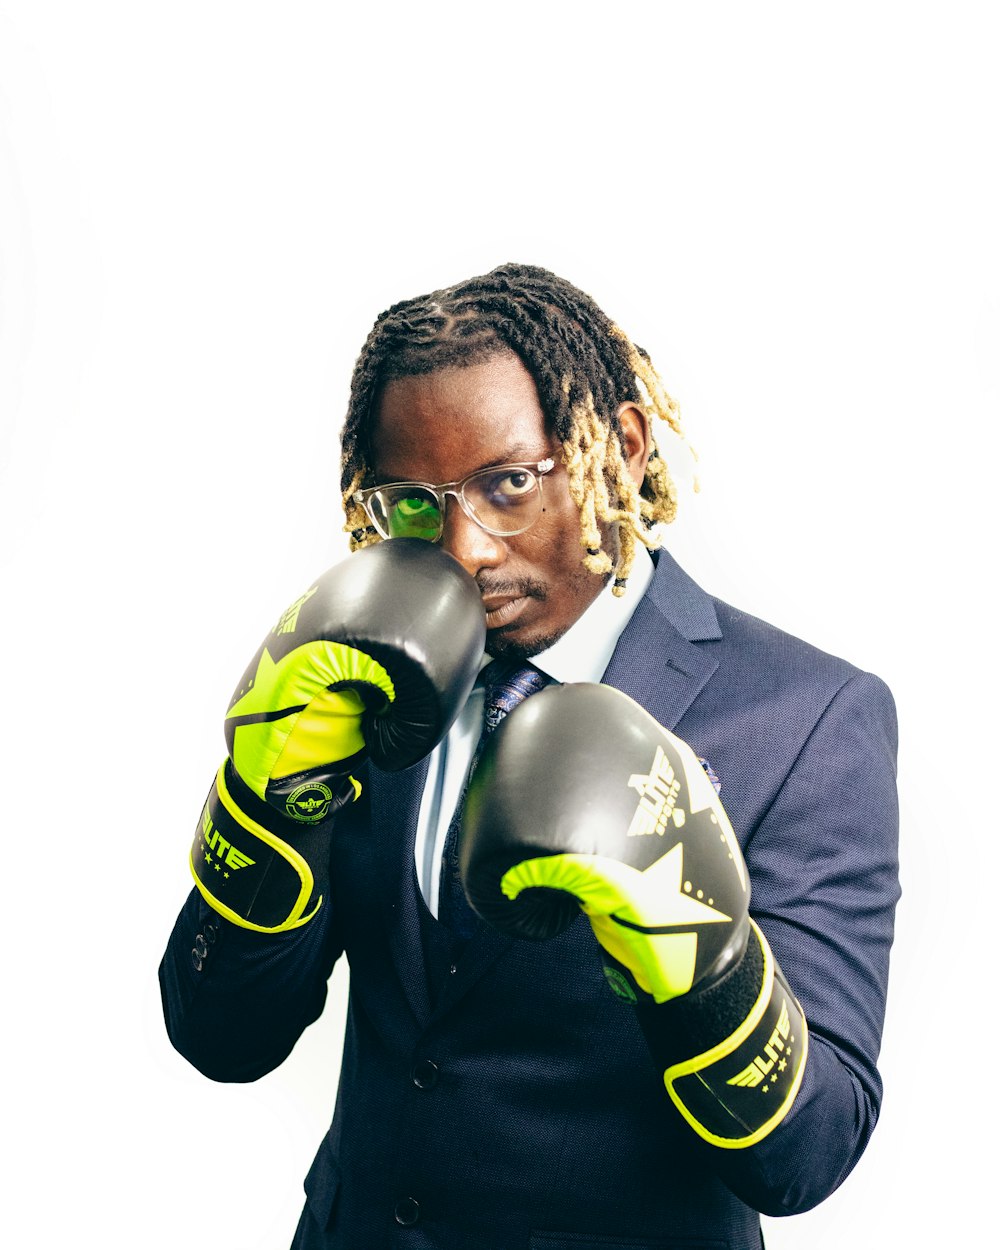 a man in a suit and tie wearing boxing gloves